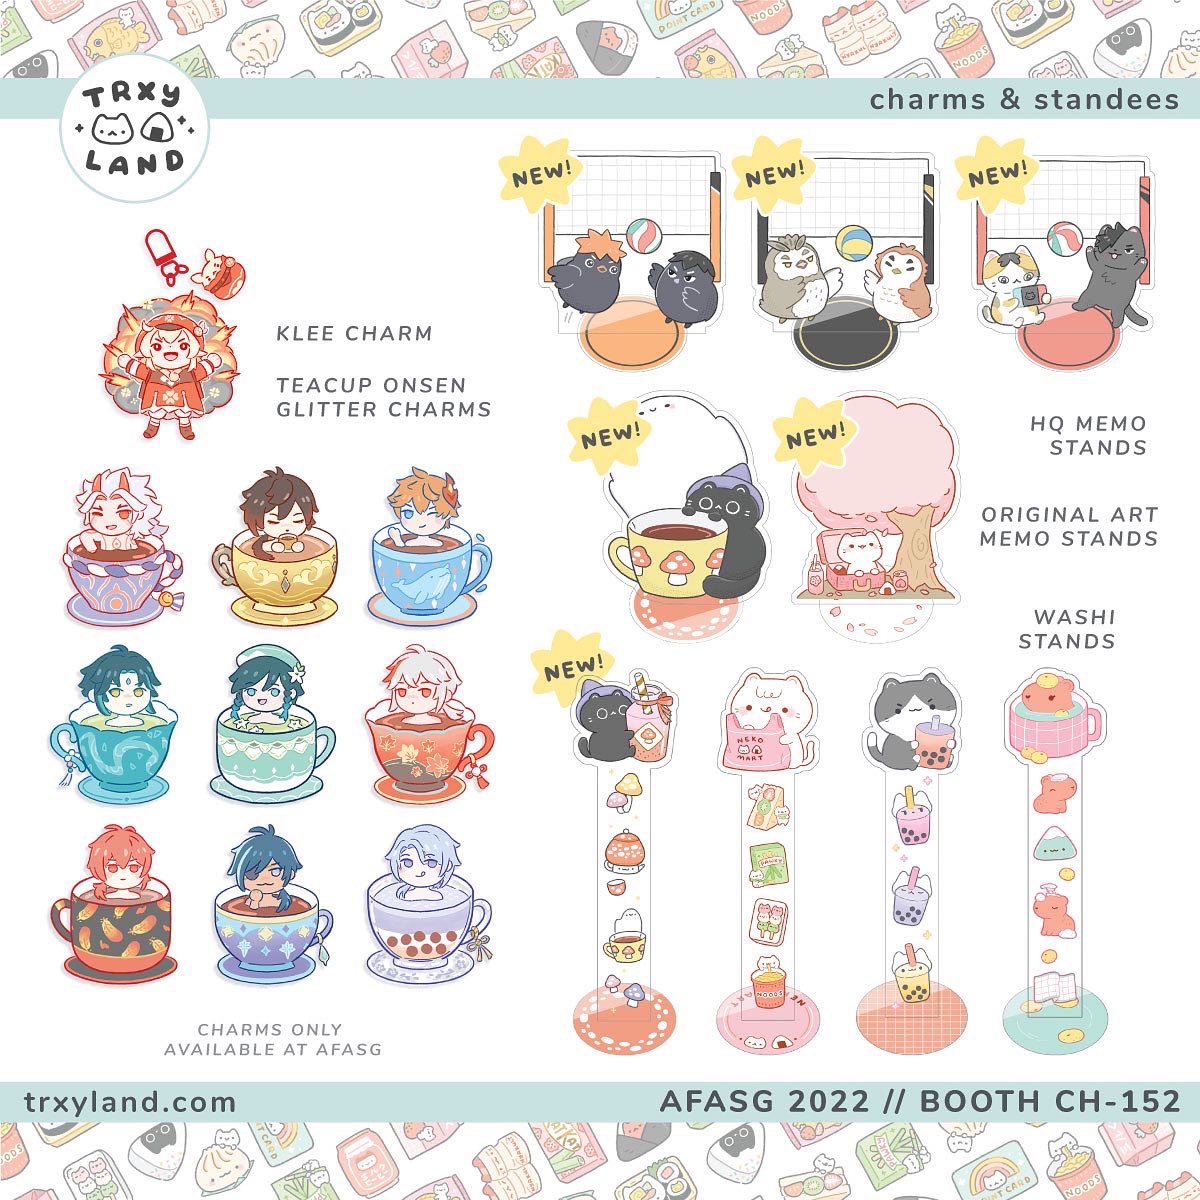 I made a catalog for AFASG this weekend! Will post a separate one for the online shop update soon 

1/2 